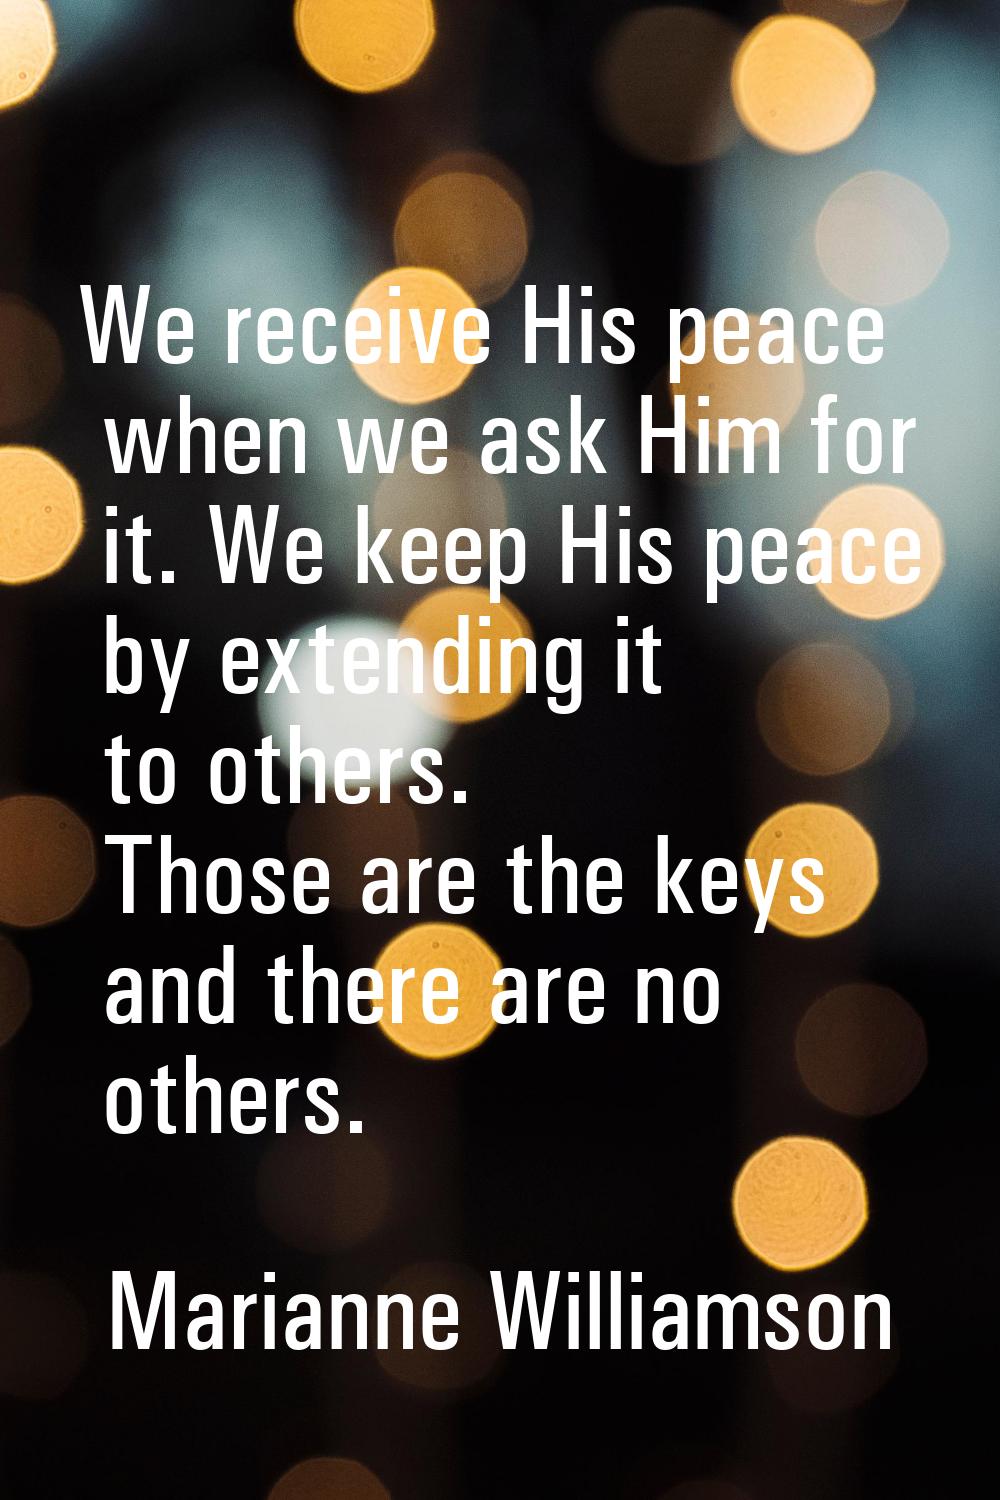 We receive His peace when we ask Him for it. We keep His peace by extending it to others. Those are